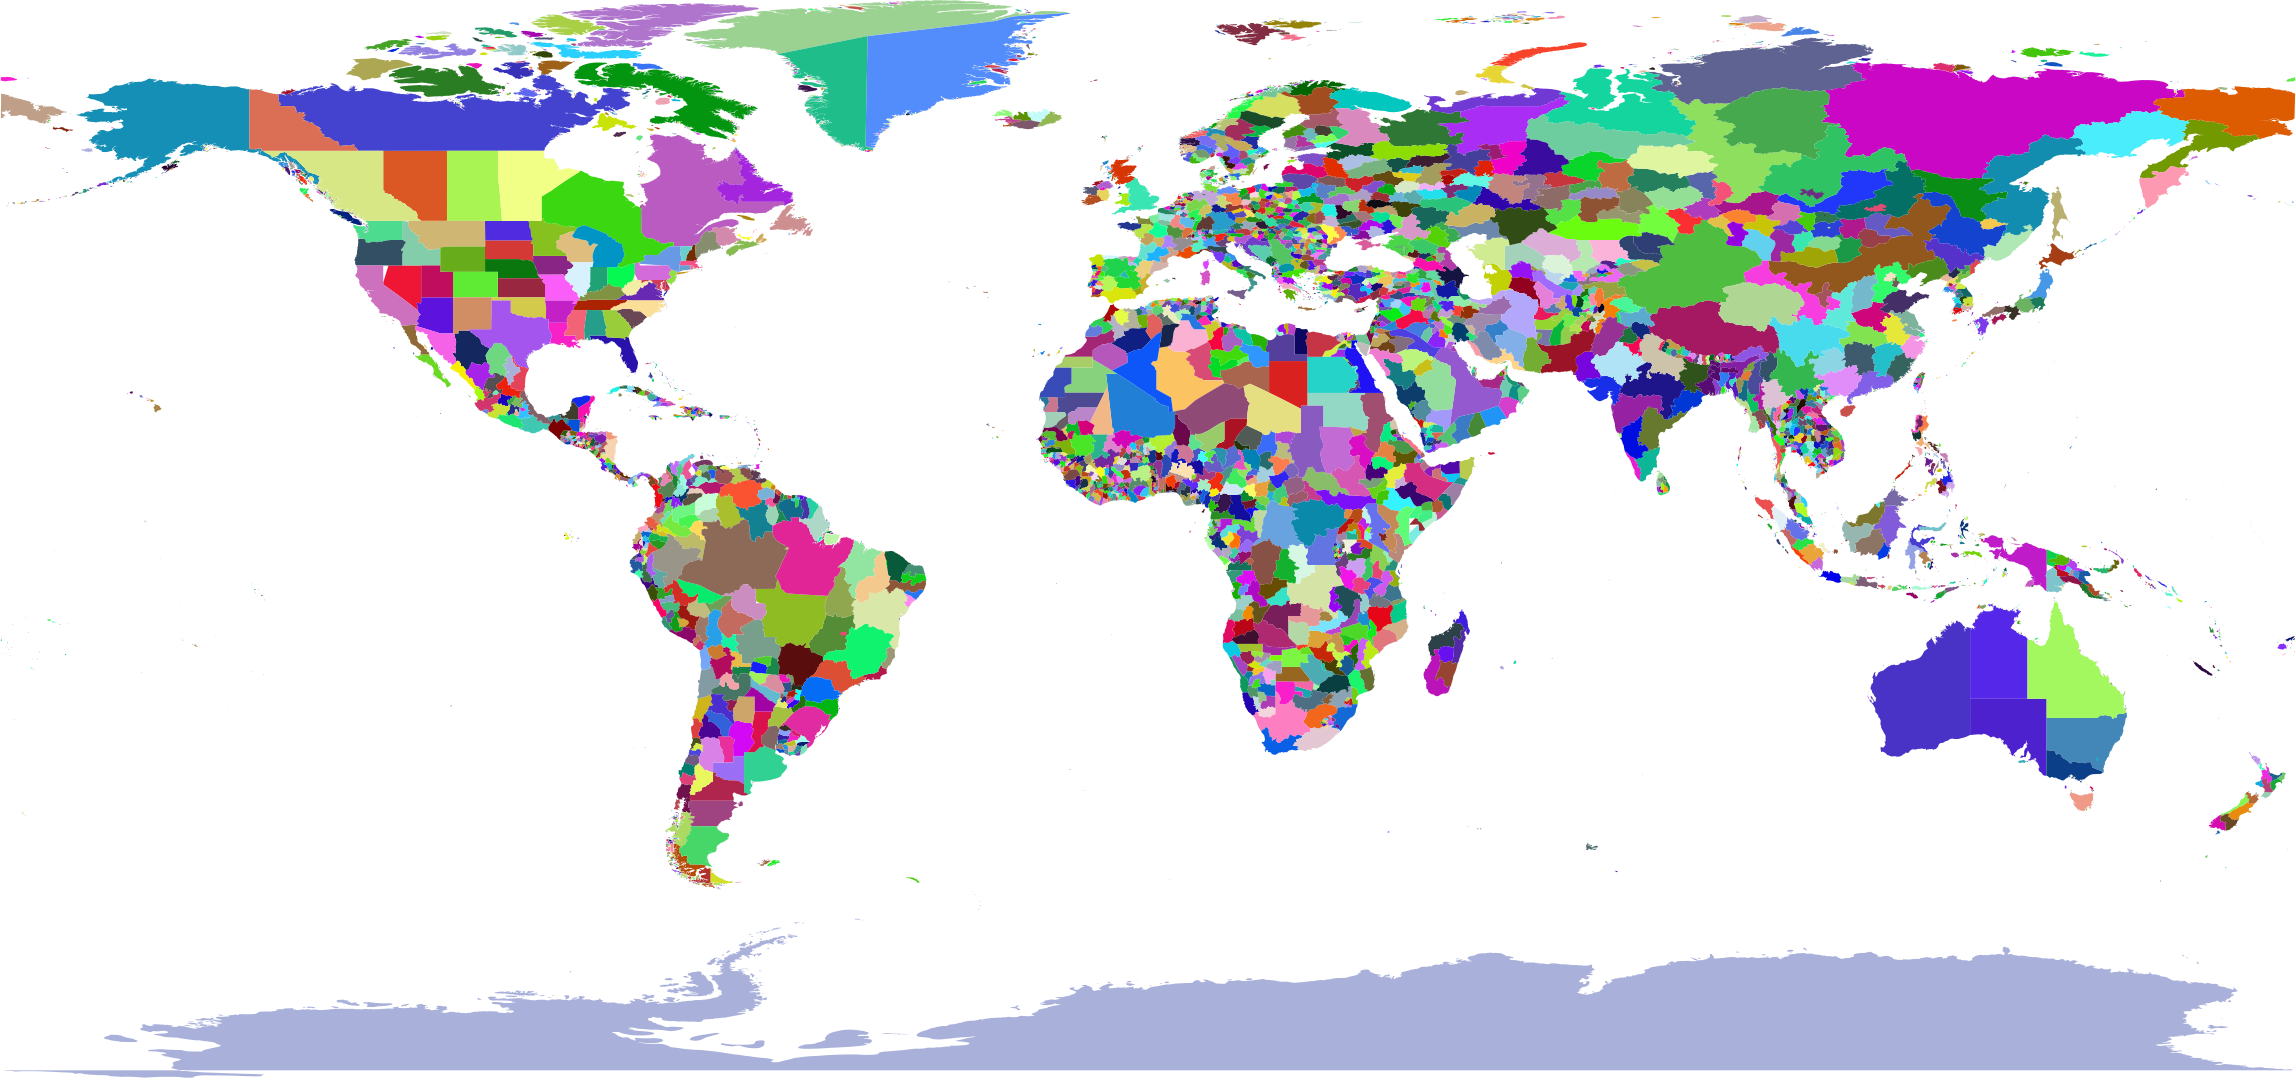 Map clipart physical map. Colorful world big image